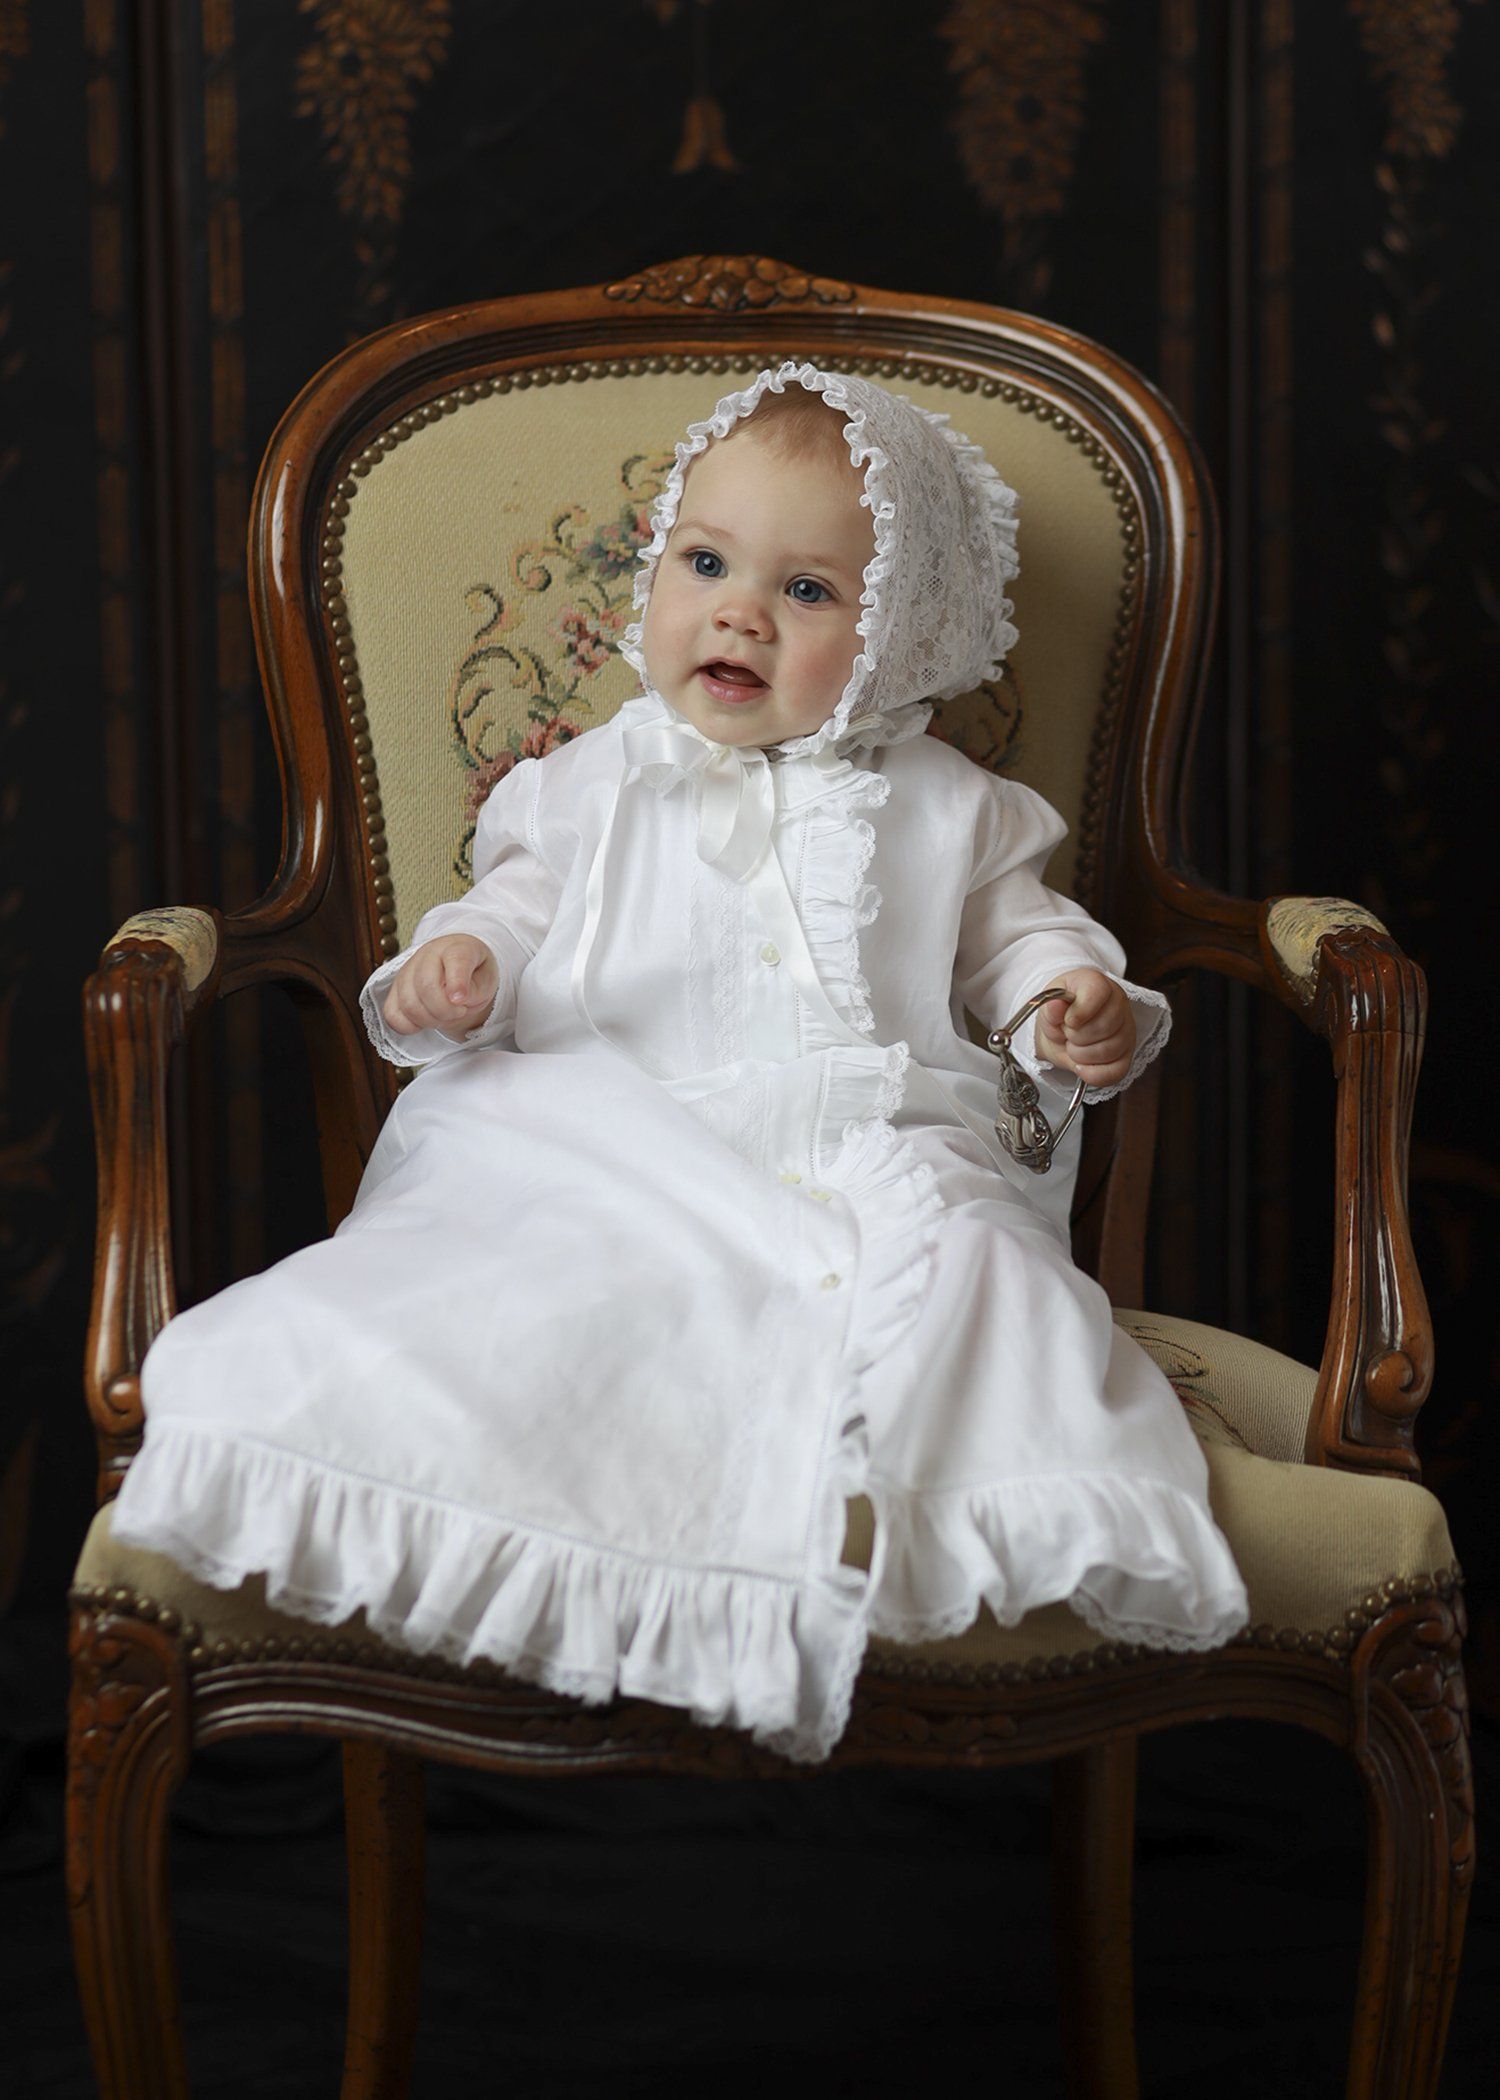 Vintage portrait of baby in chair by Nashville photographer